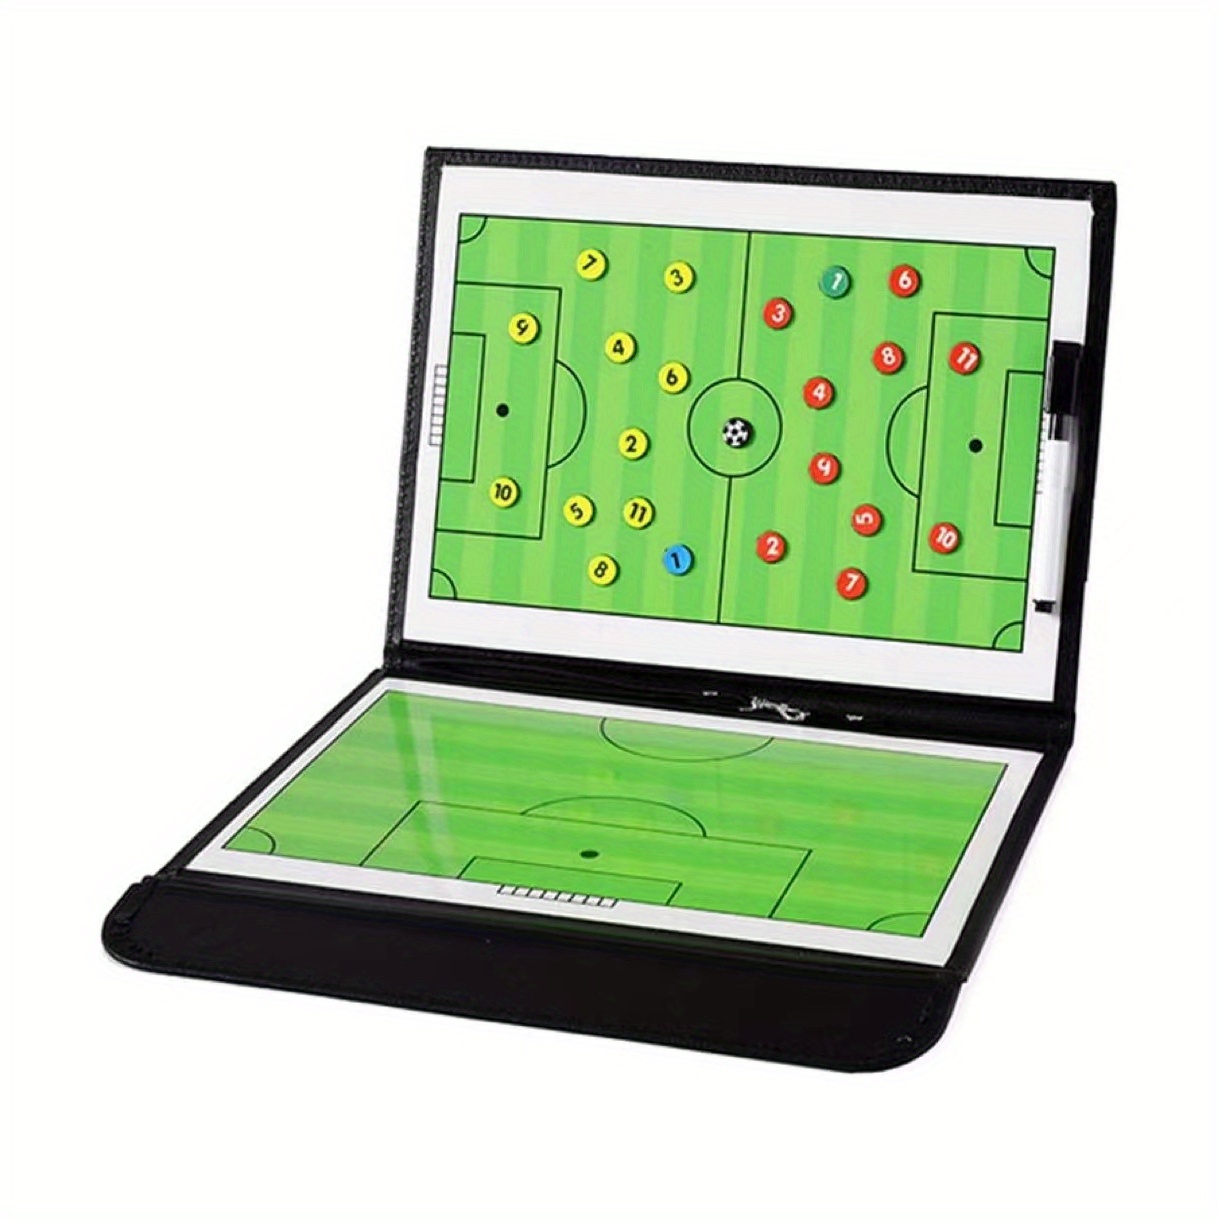 Pure Vie Football Coaches Tactical Board, Portable Soccer Magnetic Tactics  Strategy Notebook Football Coaching Clipboard - Sport Training Assistant  Equipment KIt with Player Markers, Pen and Eraser 52 cm x 34 cm